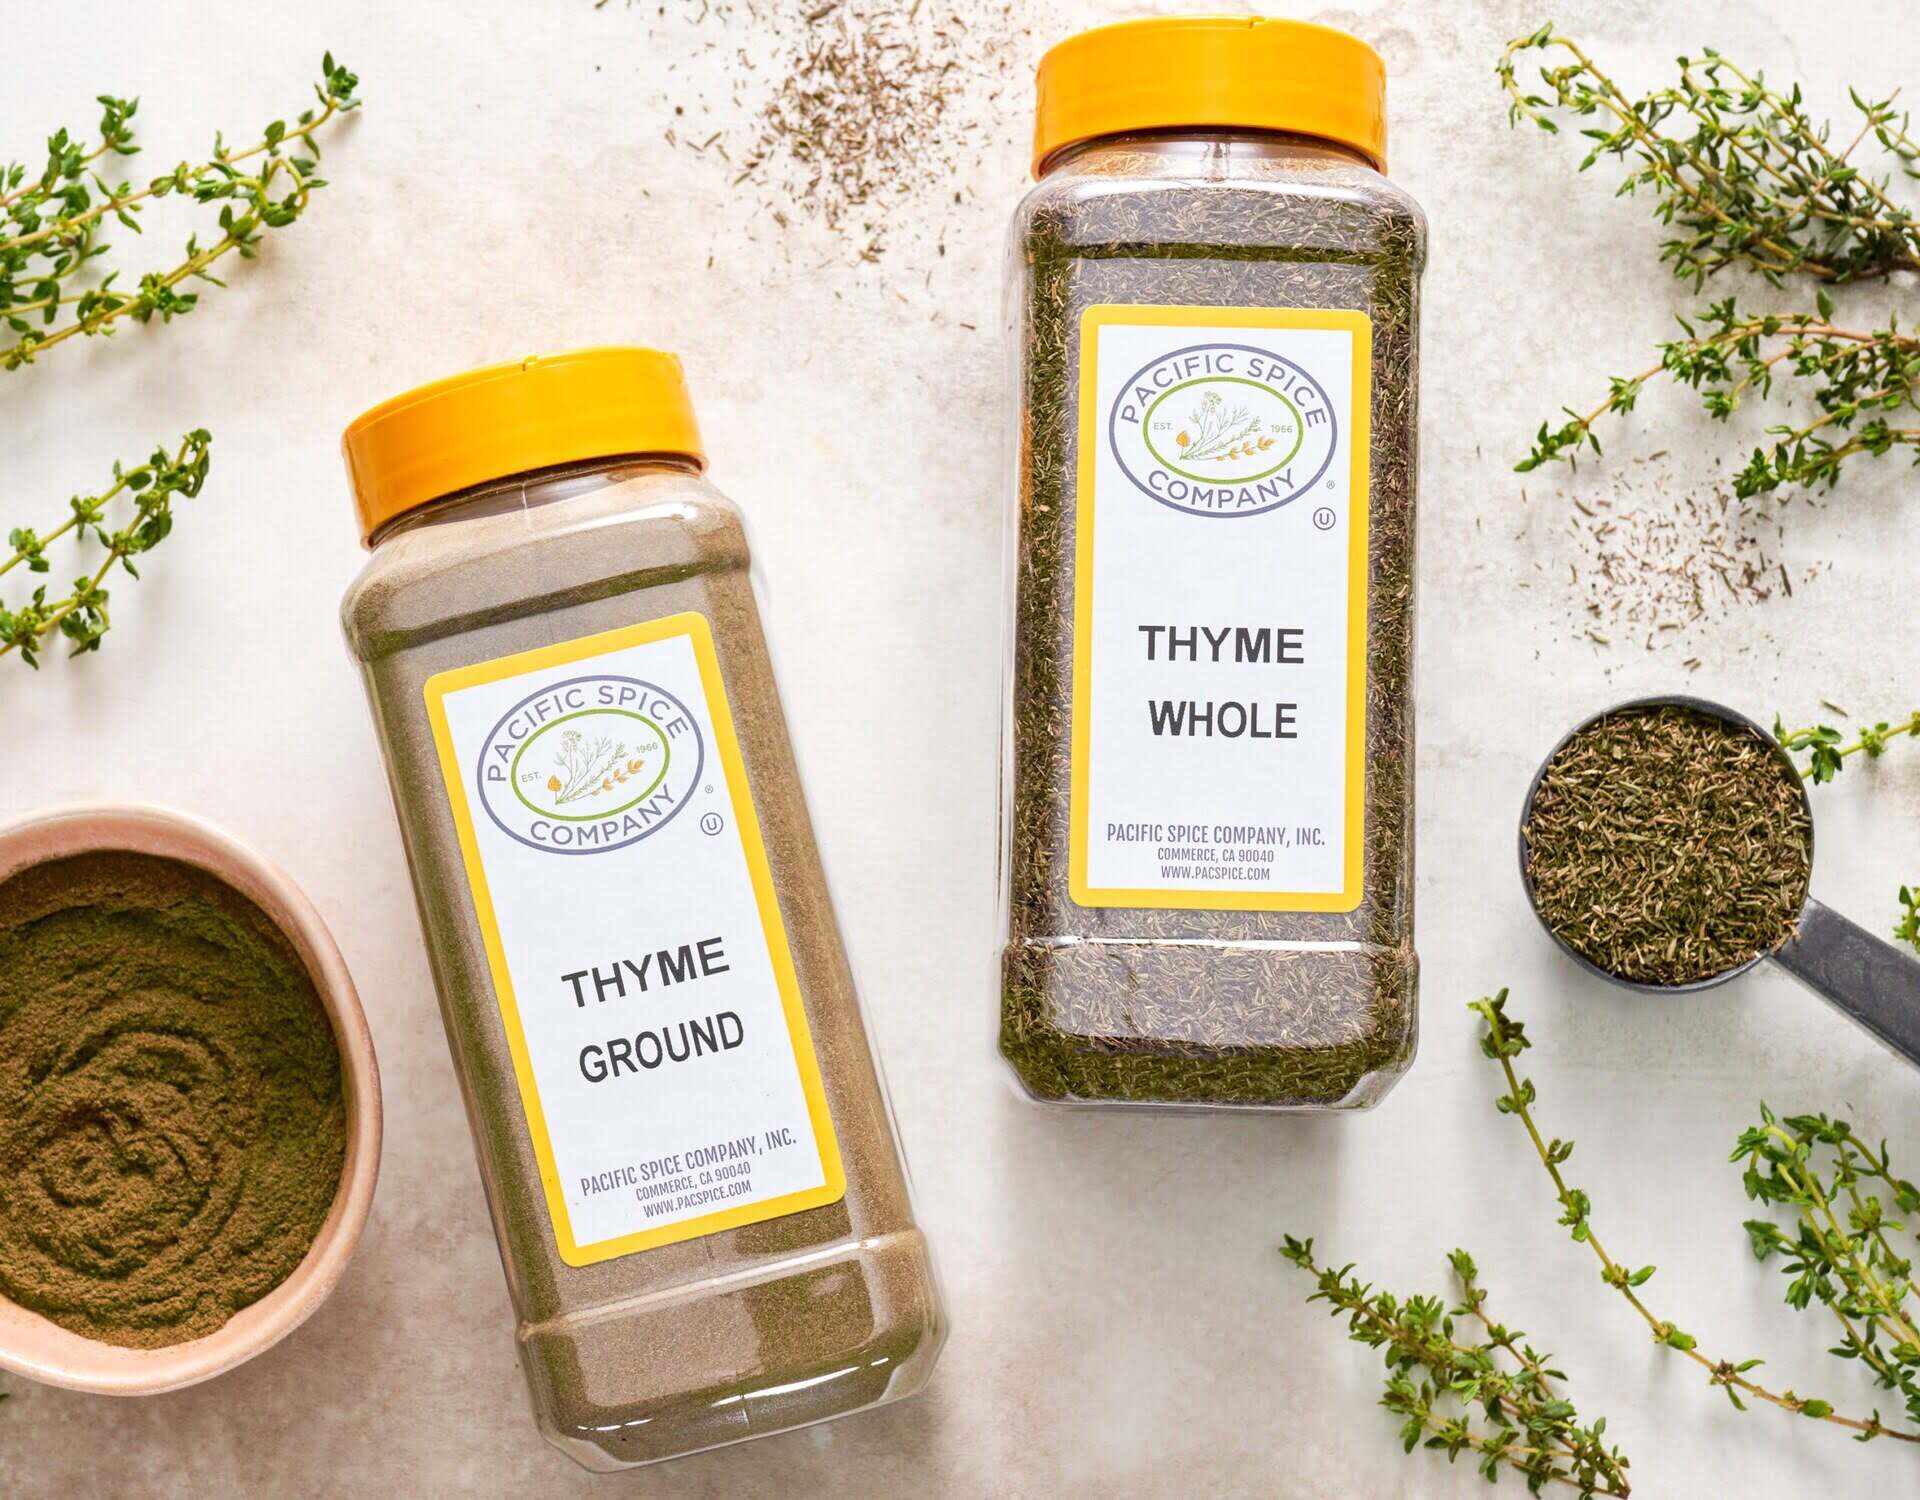 What Is Ground Thyme Used For